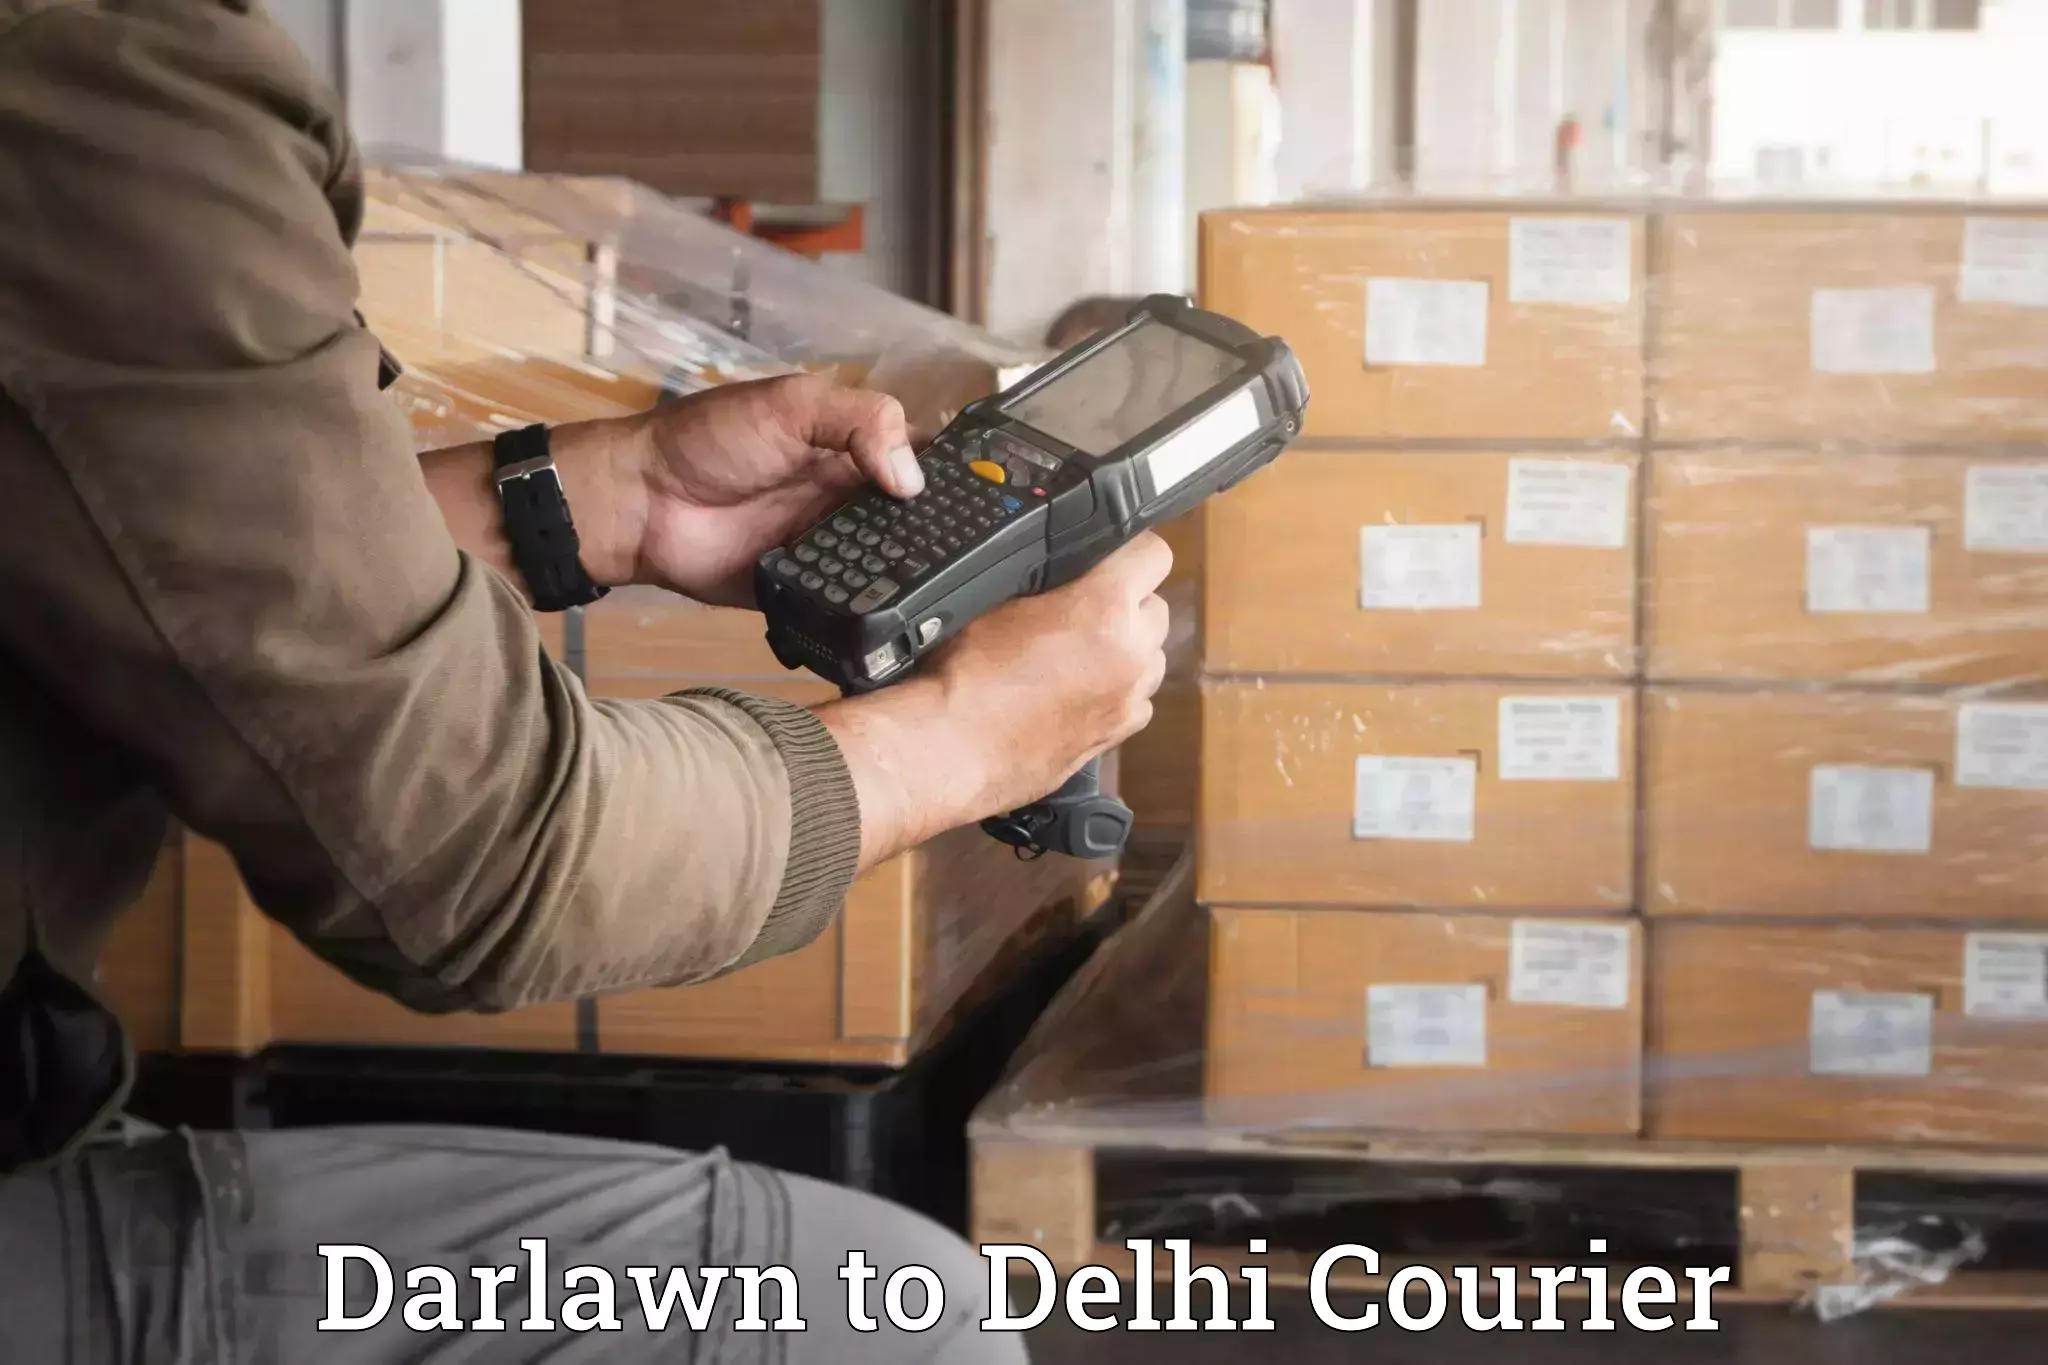 Professional home movers Darlawn to Delhi